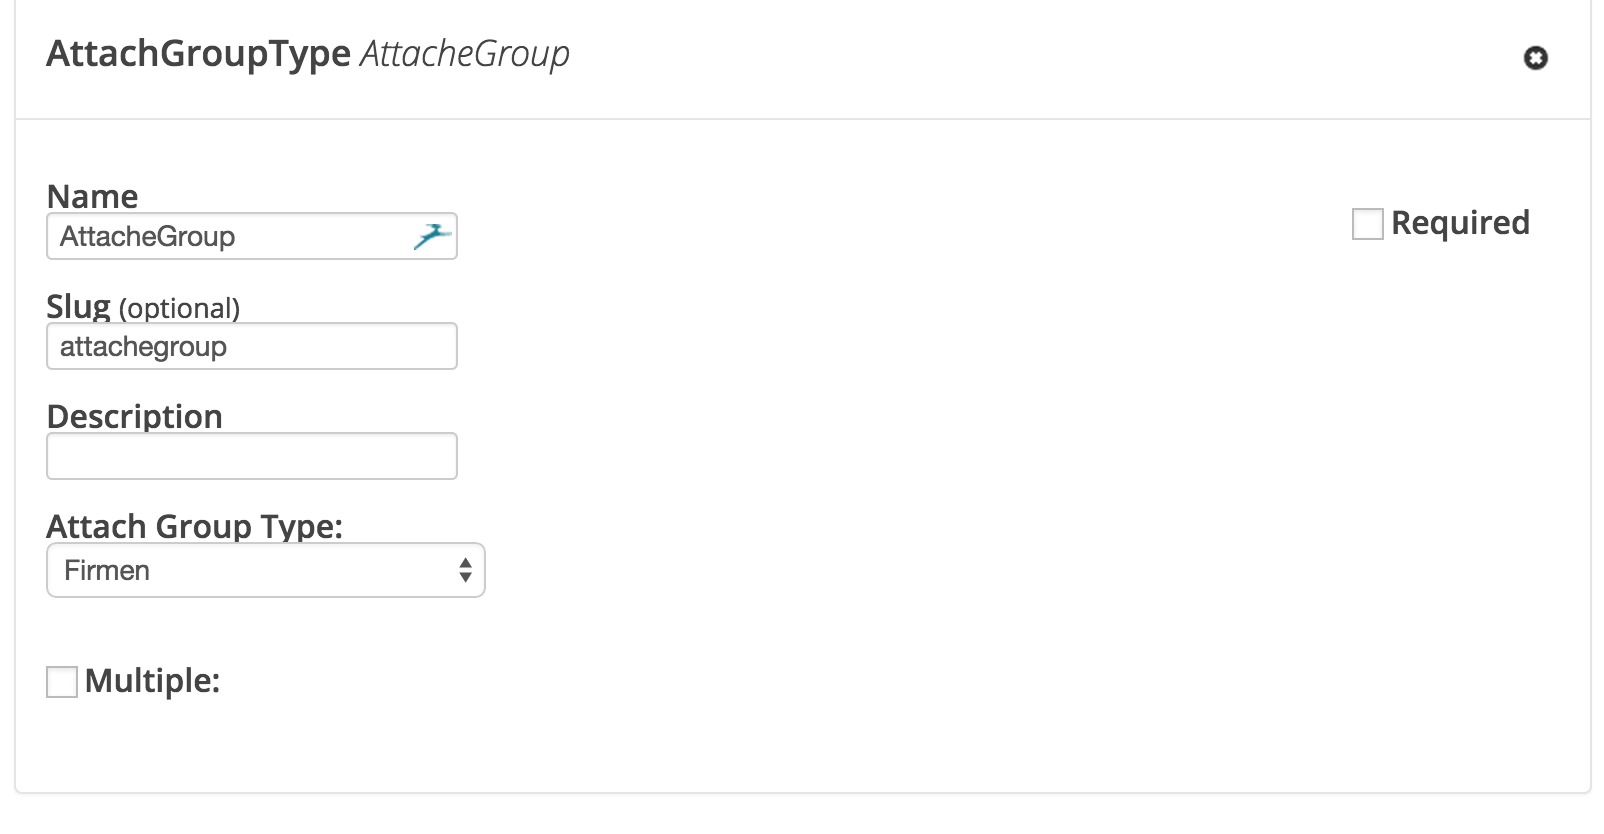 **Attache Groups Taxonomy Form Element** - A Form Element to select a Group you want to create a relationship for.